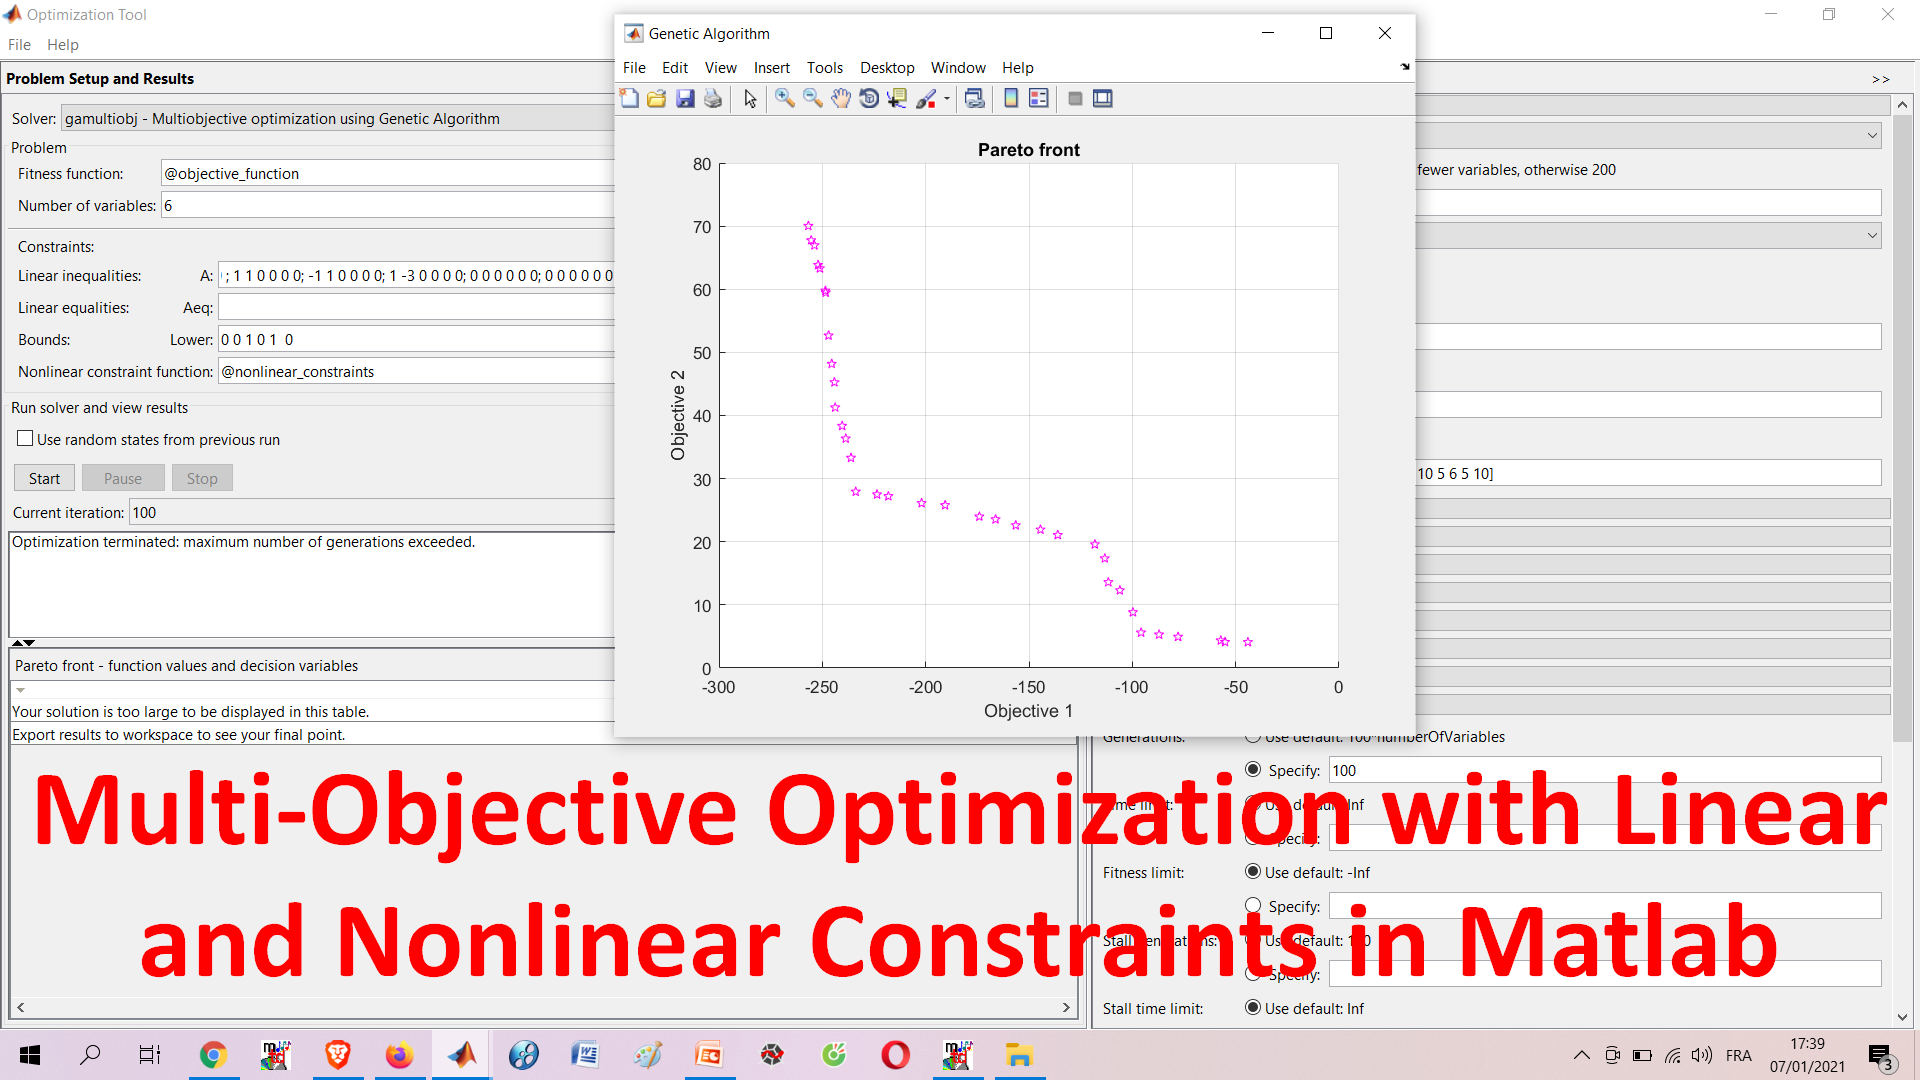 Multi-Objective Optimization with Linear and Nonlinear Constraints in Matlab